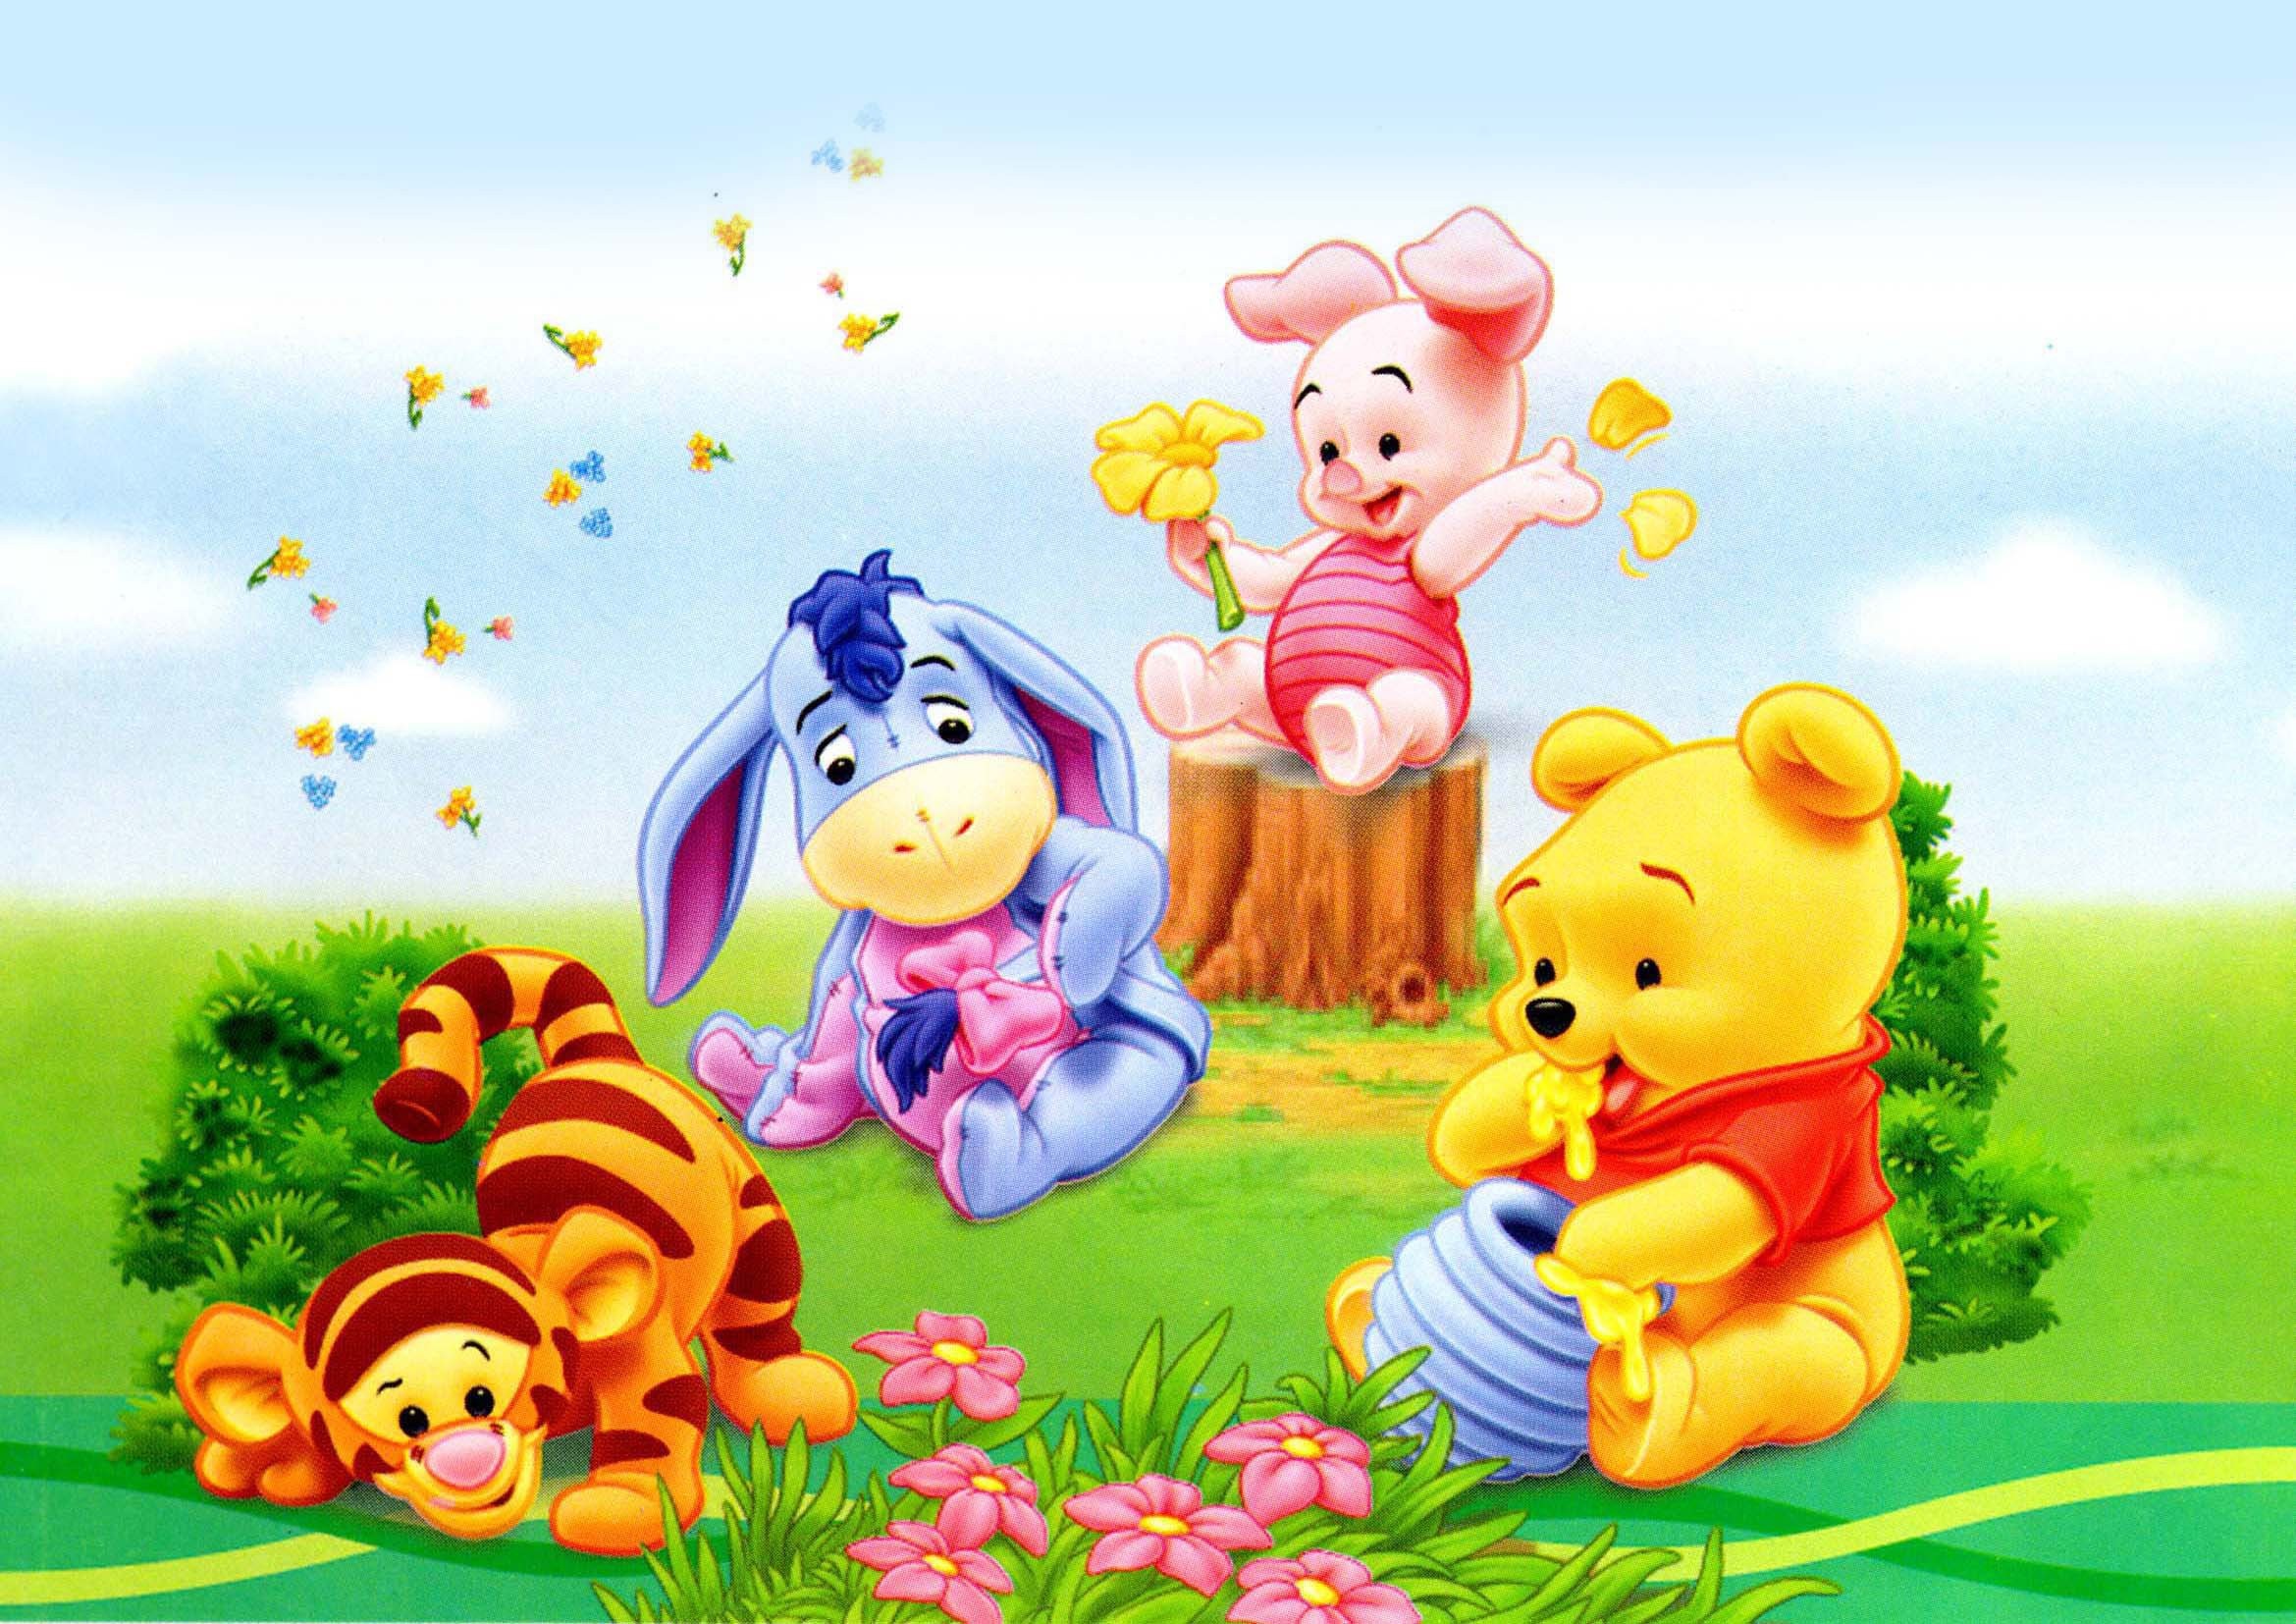 Disney Winnie the Pooh illustration Winnie the Pooh Piglet WinniethePooh  Tigger Winnie Pooh heroes orange computer Wallpaper png  PNGWing